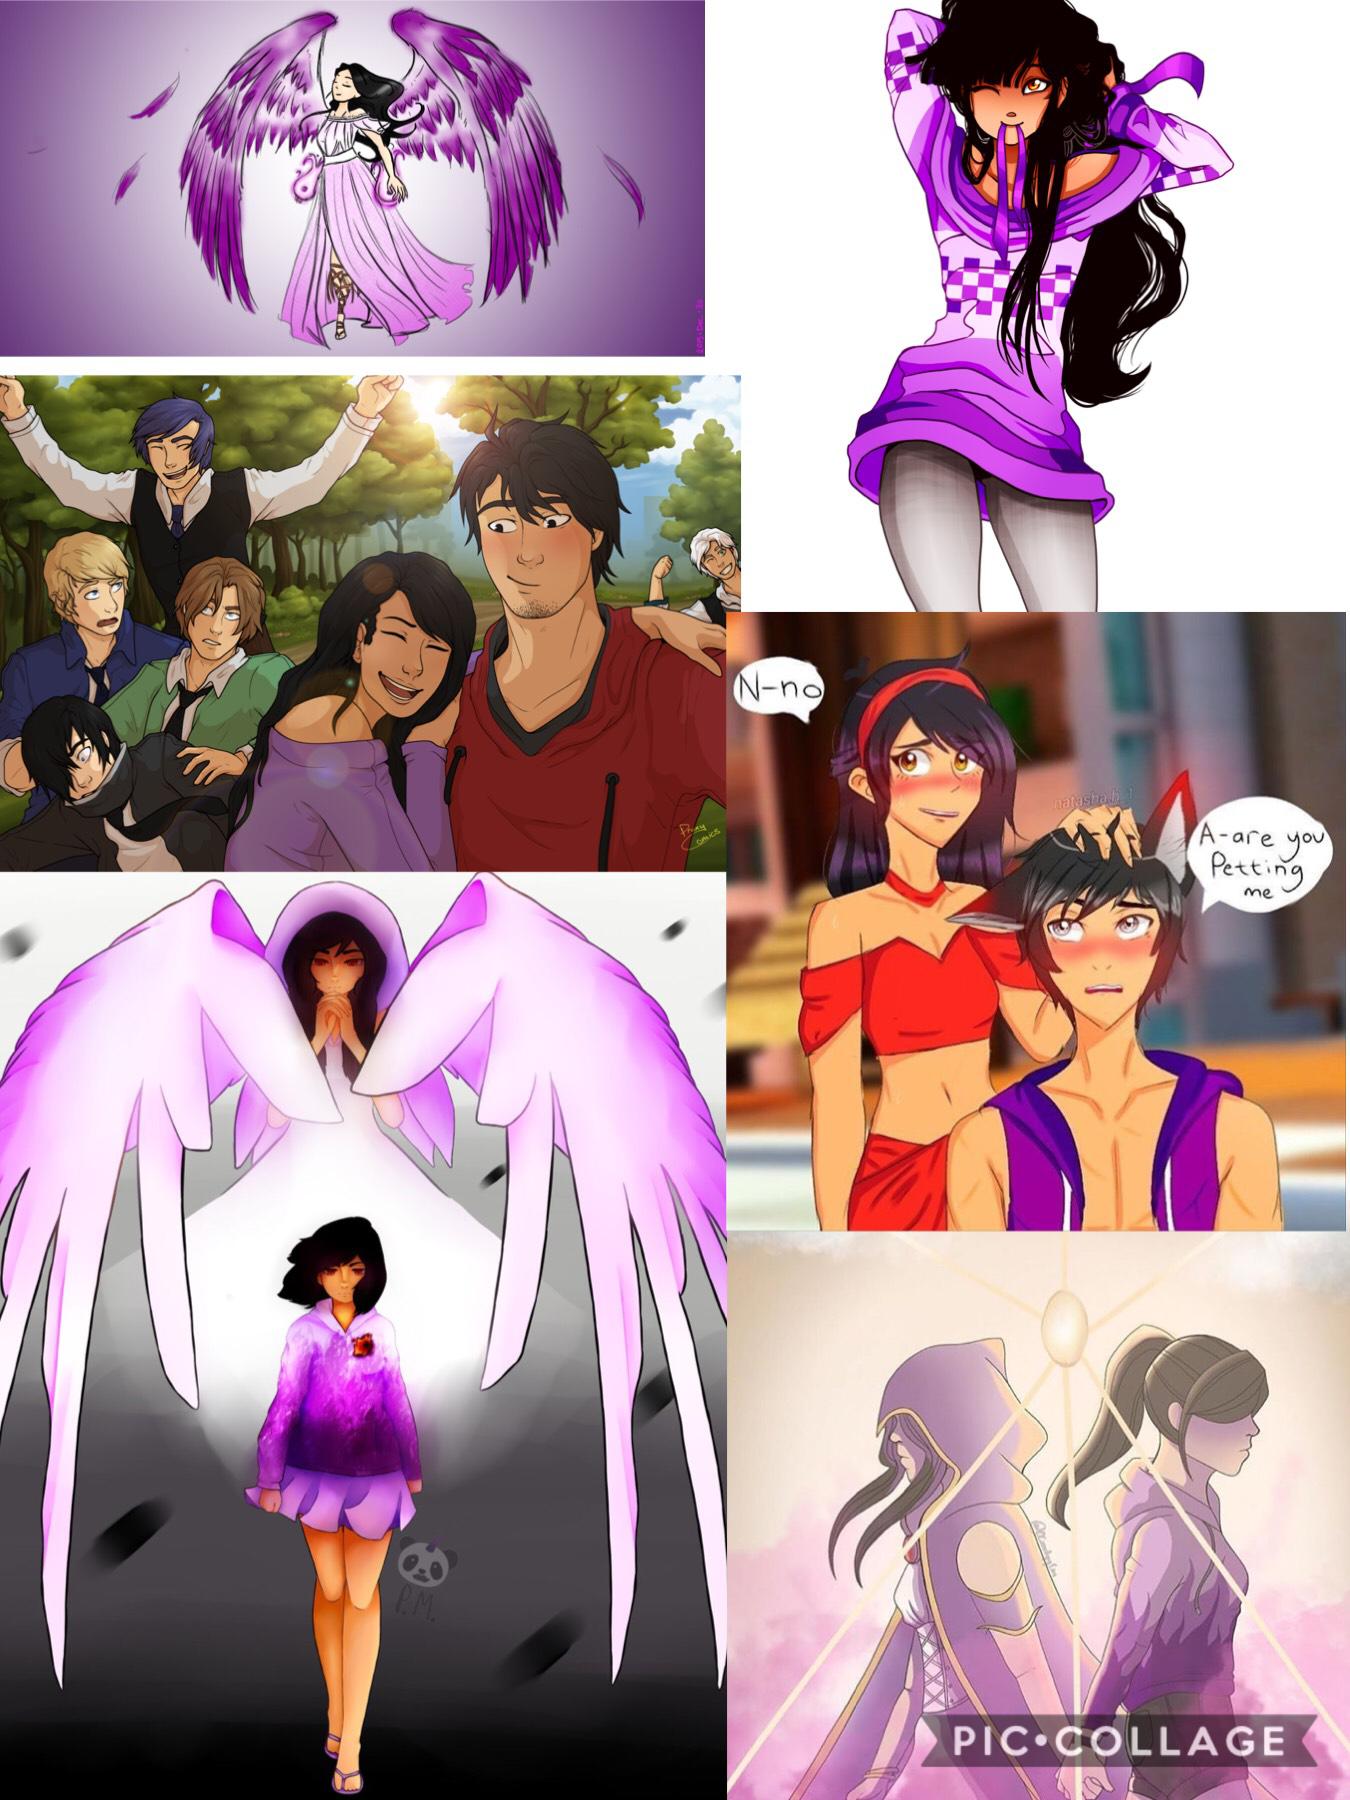 Aphmau fans where you at!?!